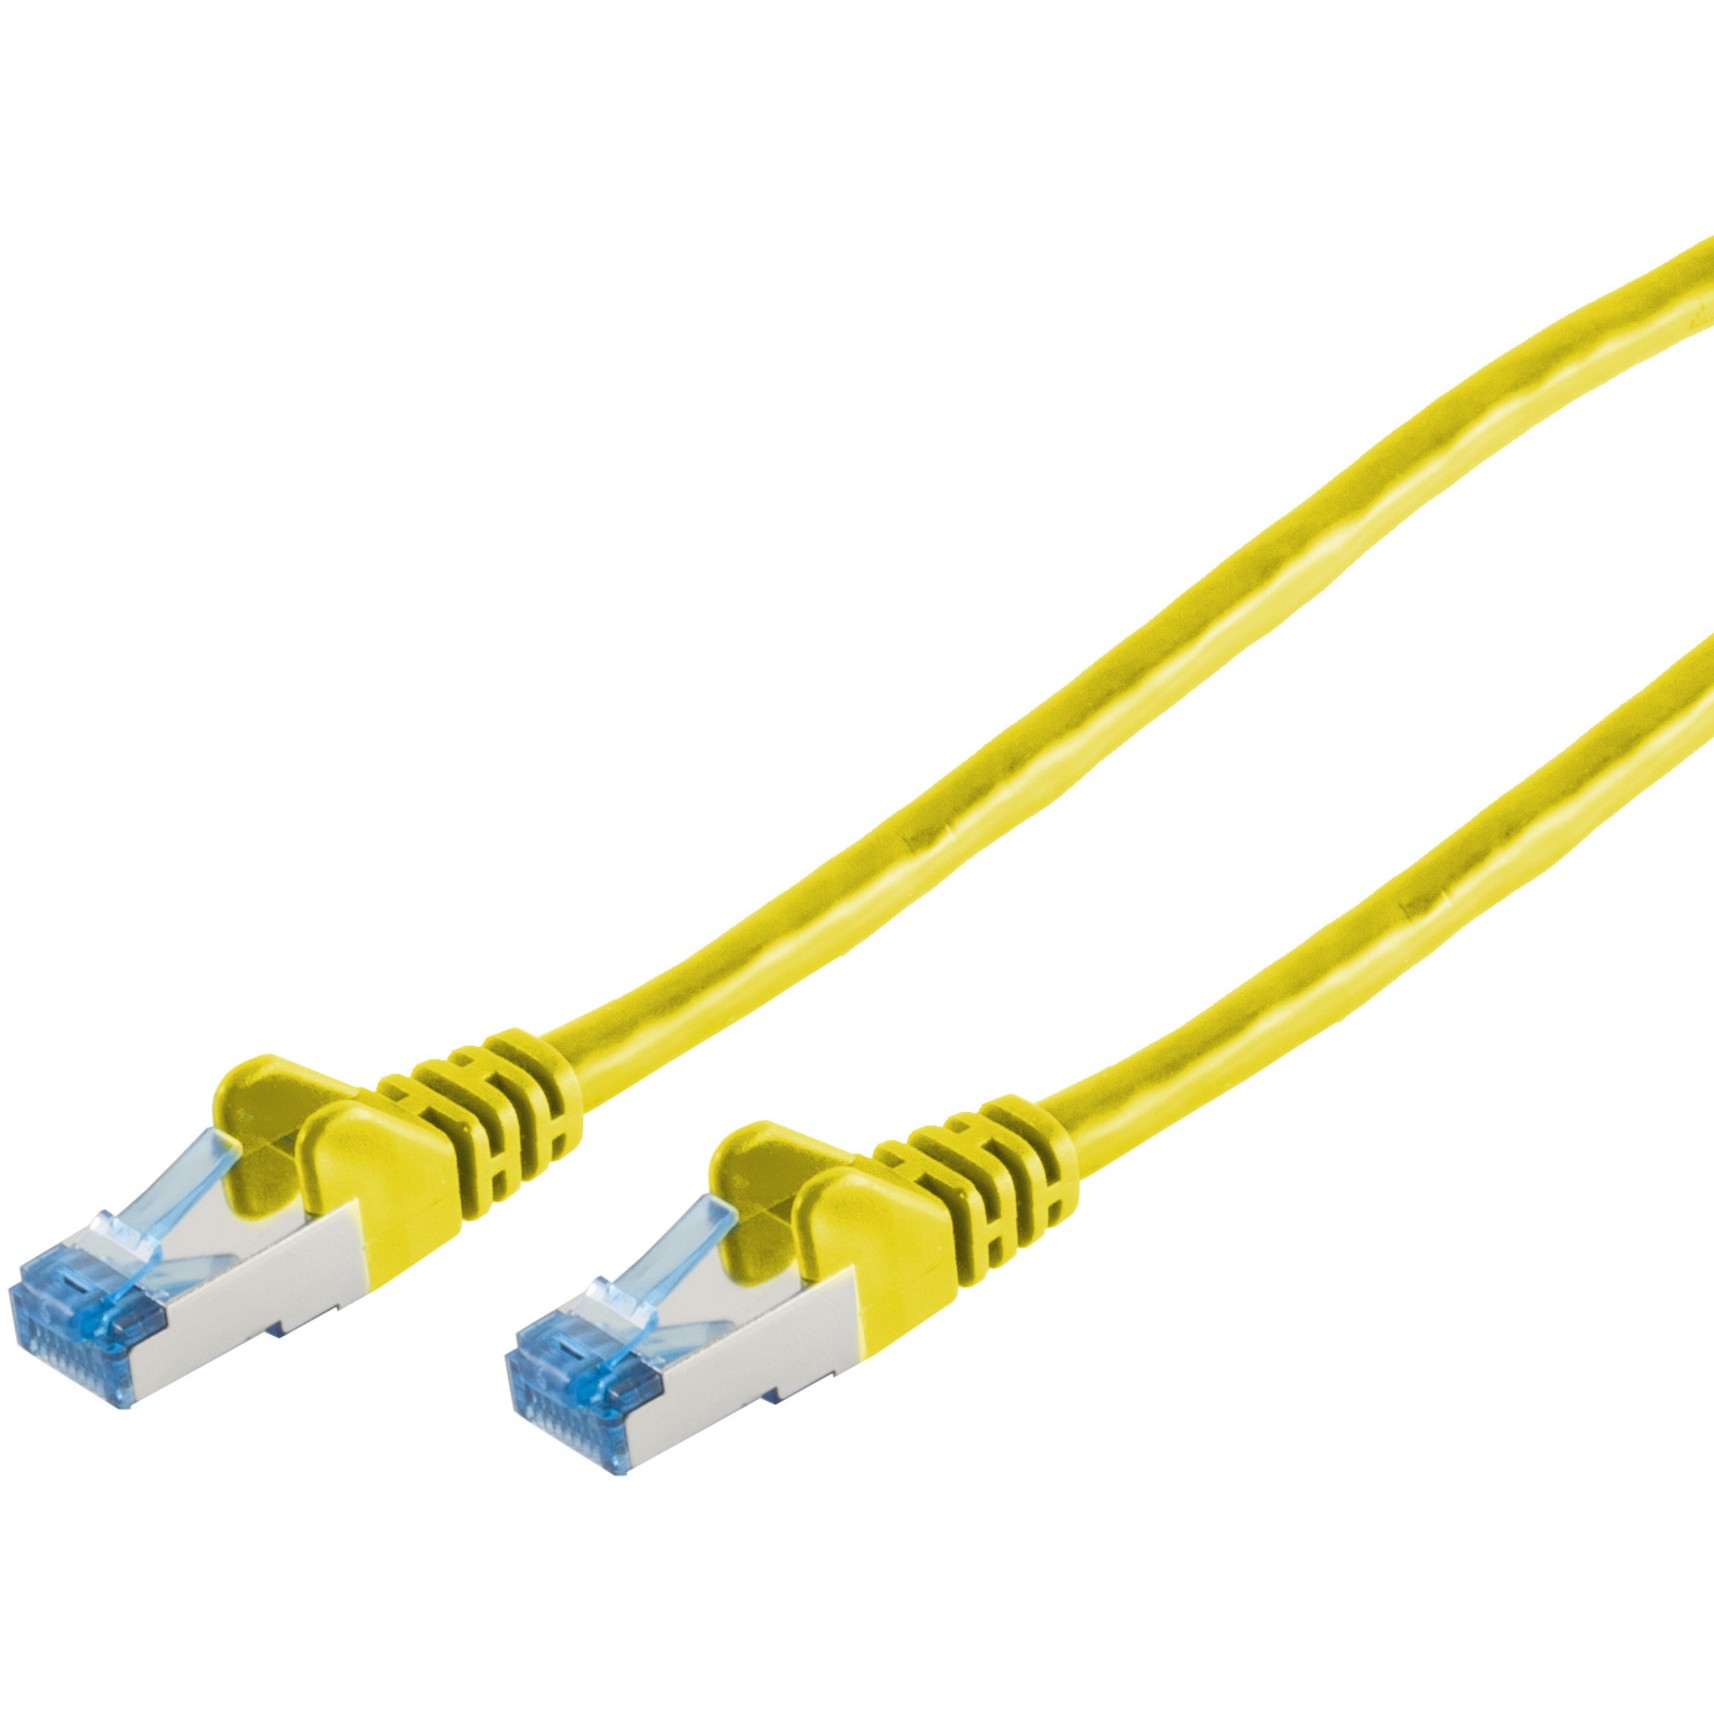 S-Conn 75711-0.5Y networking cable